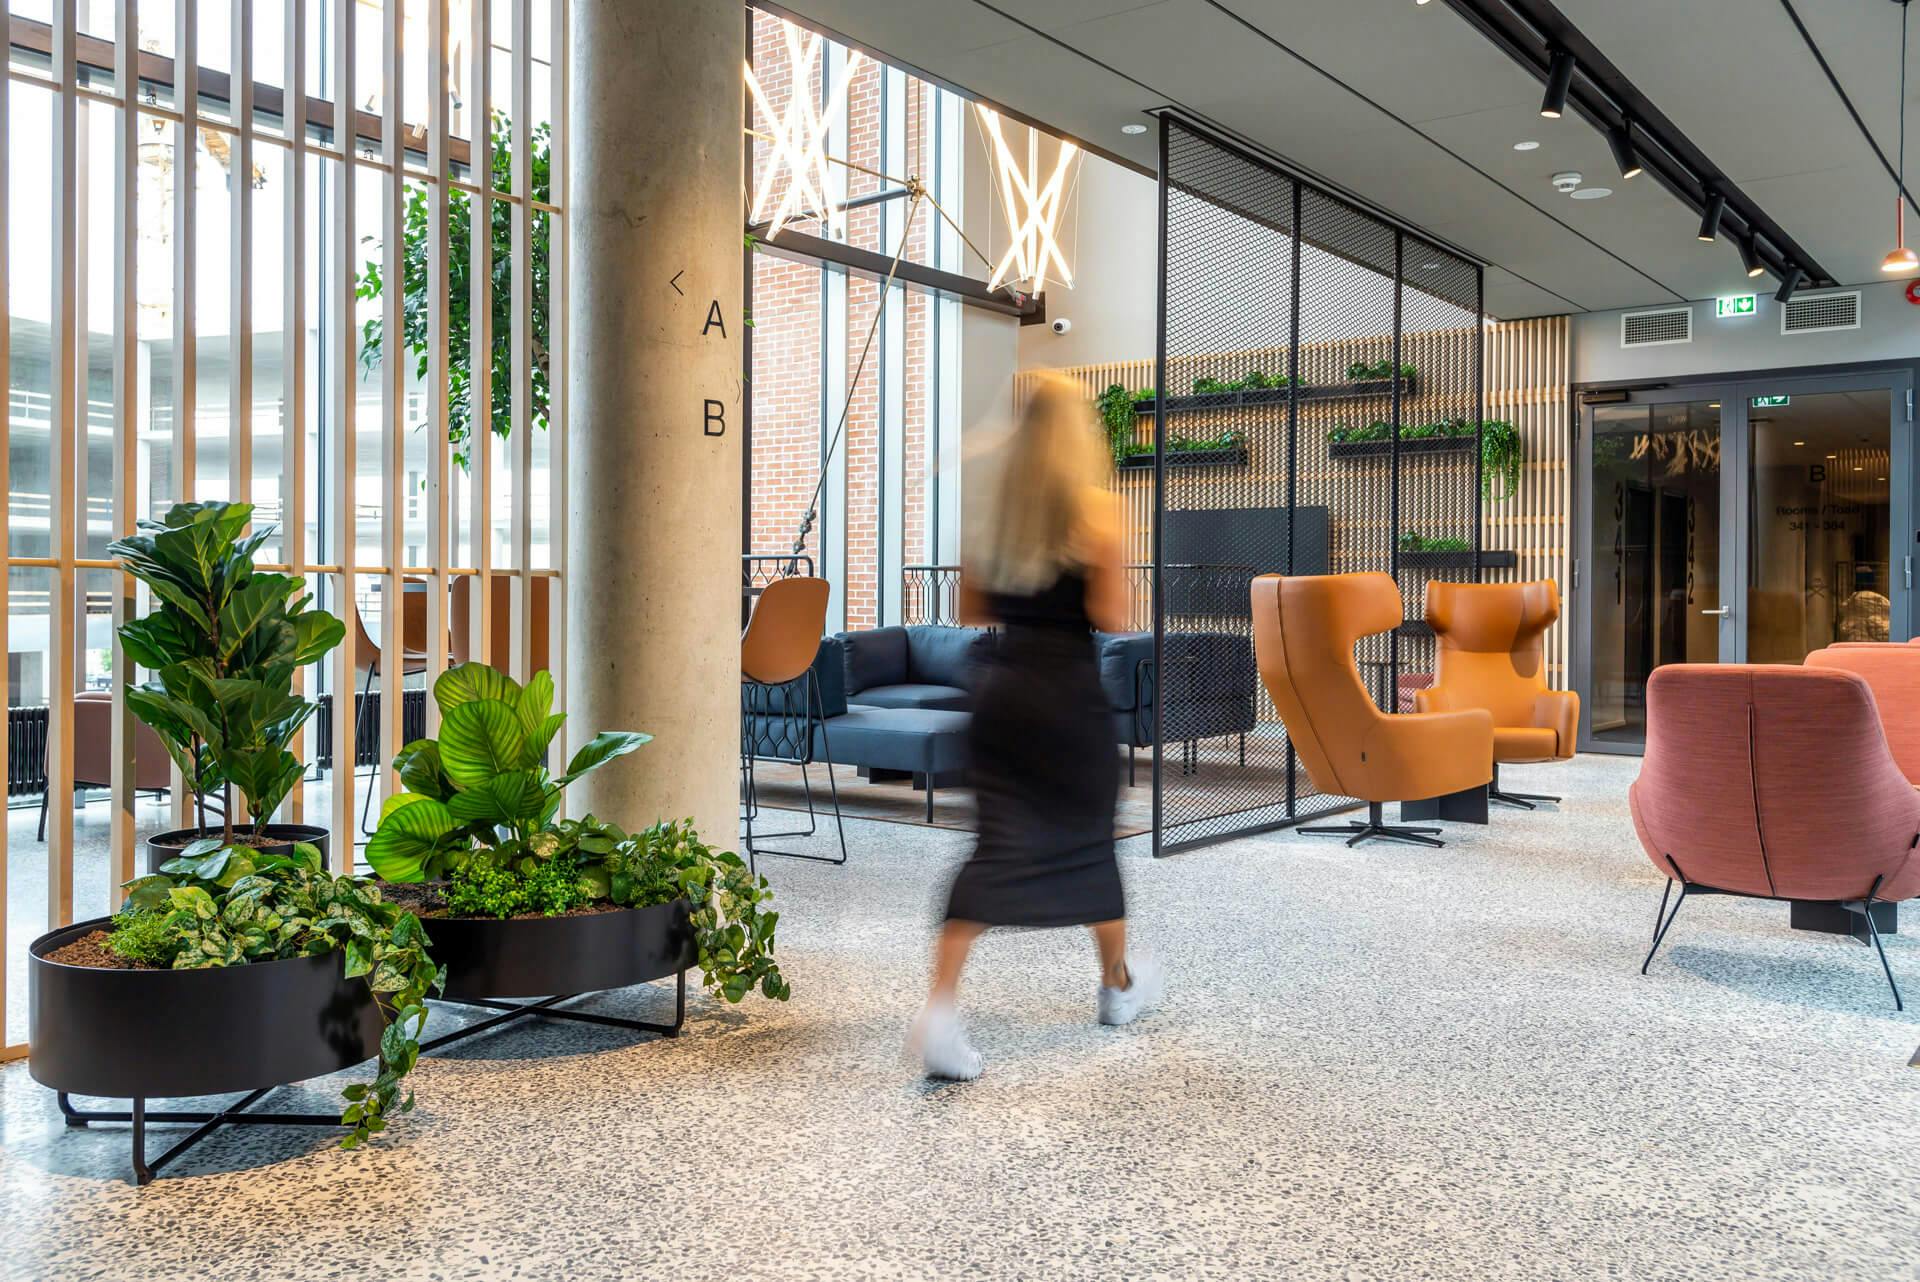 Woman walking in the lobby area, seating groups, plants